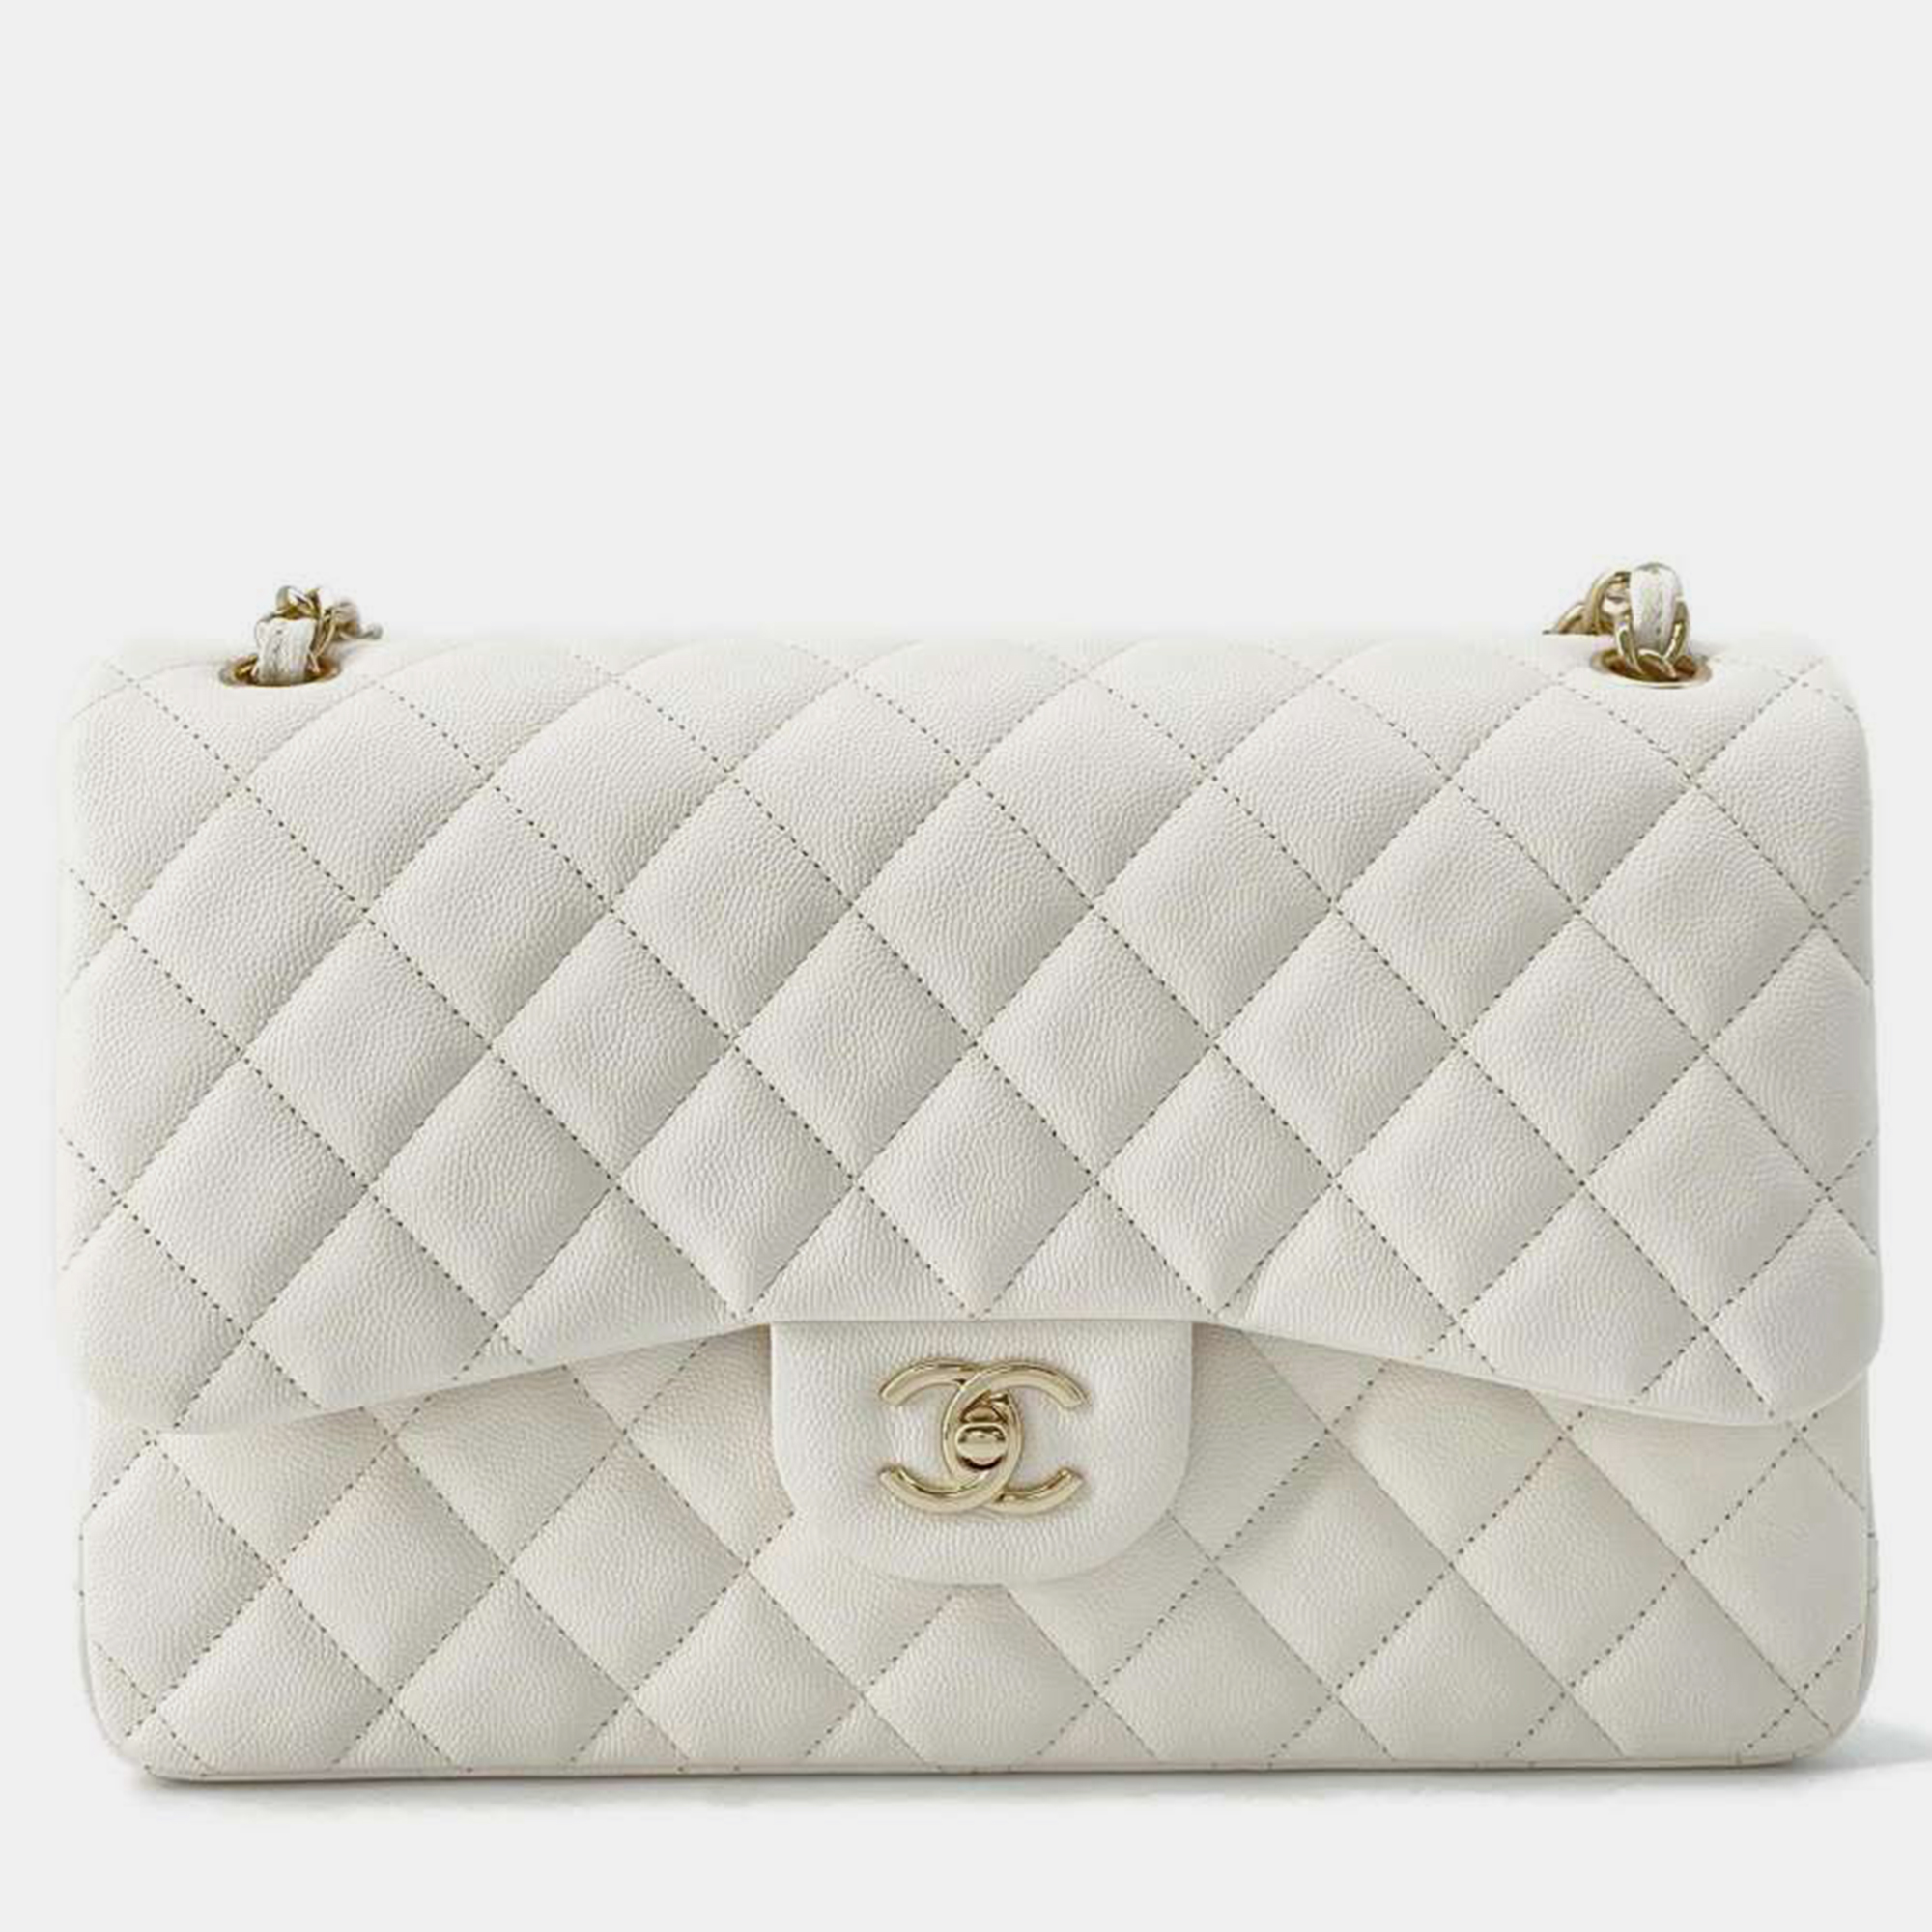 Chanel white leather medium classic double flap bag